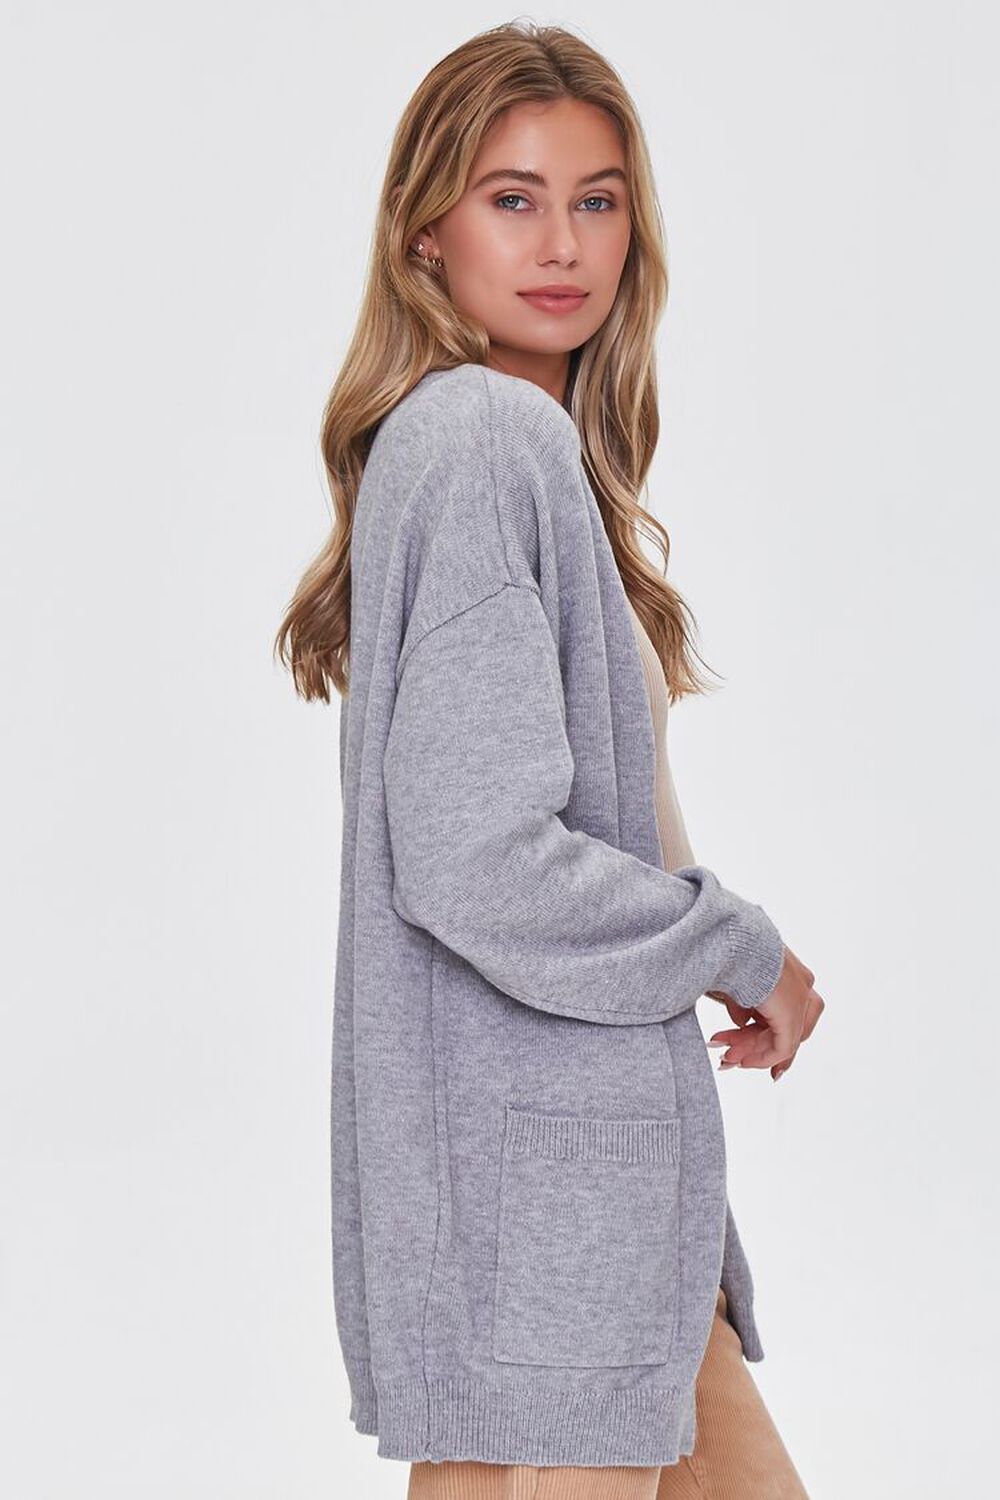 HEATHER GREY Open-Front Cardigan Sweater, image 2